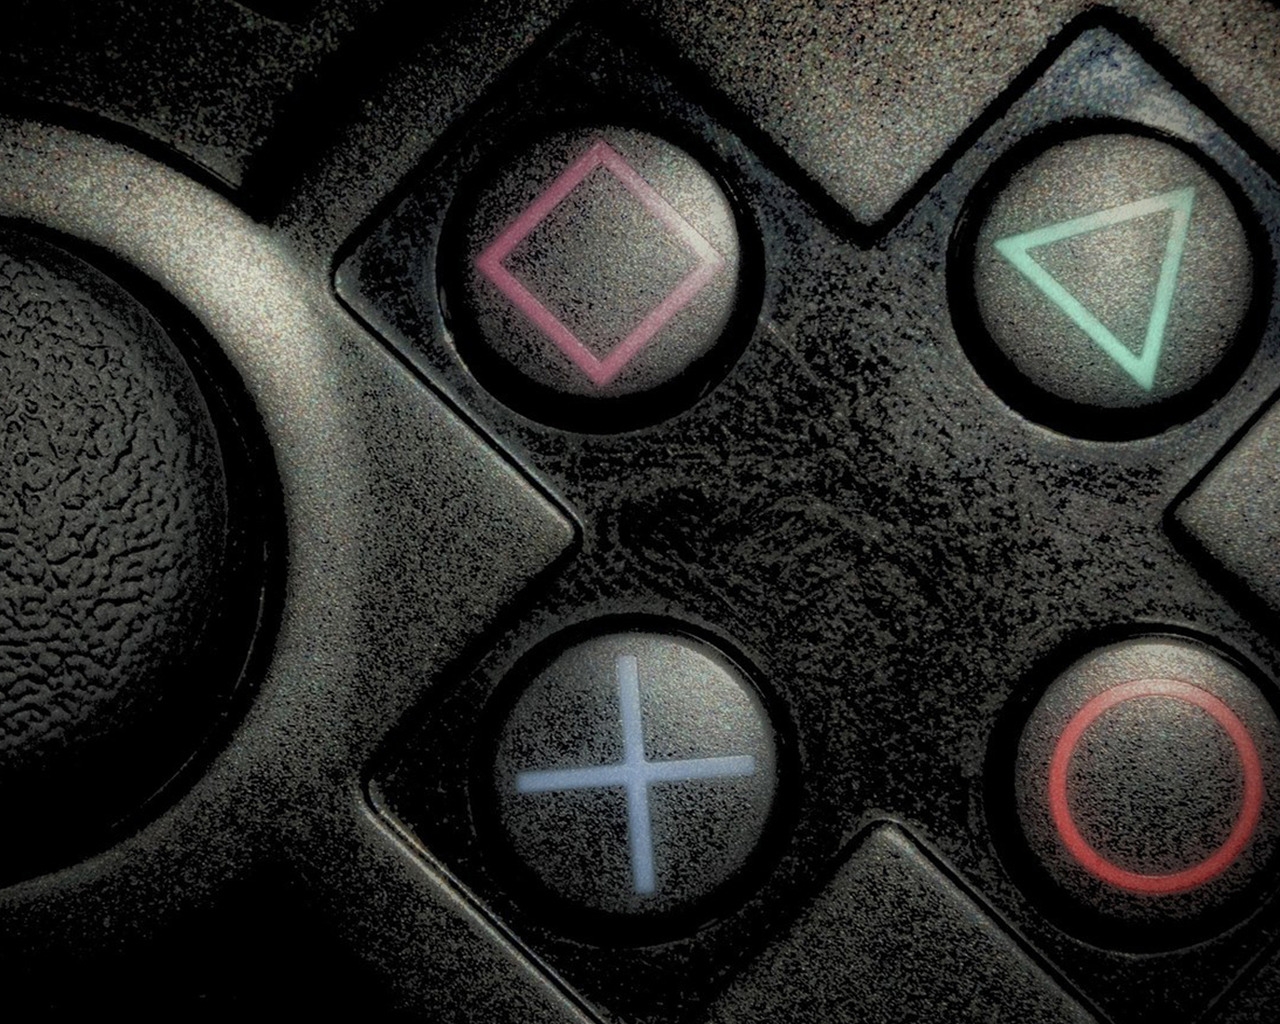 Playstation Buttons for 1280 x 1024 resolution